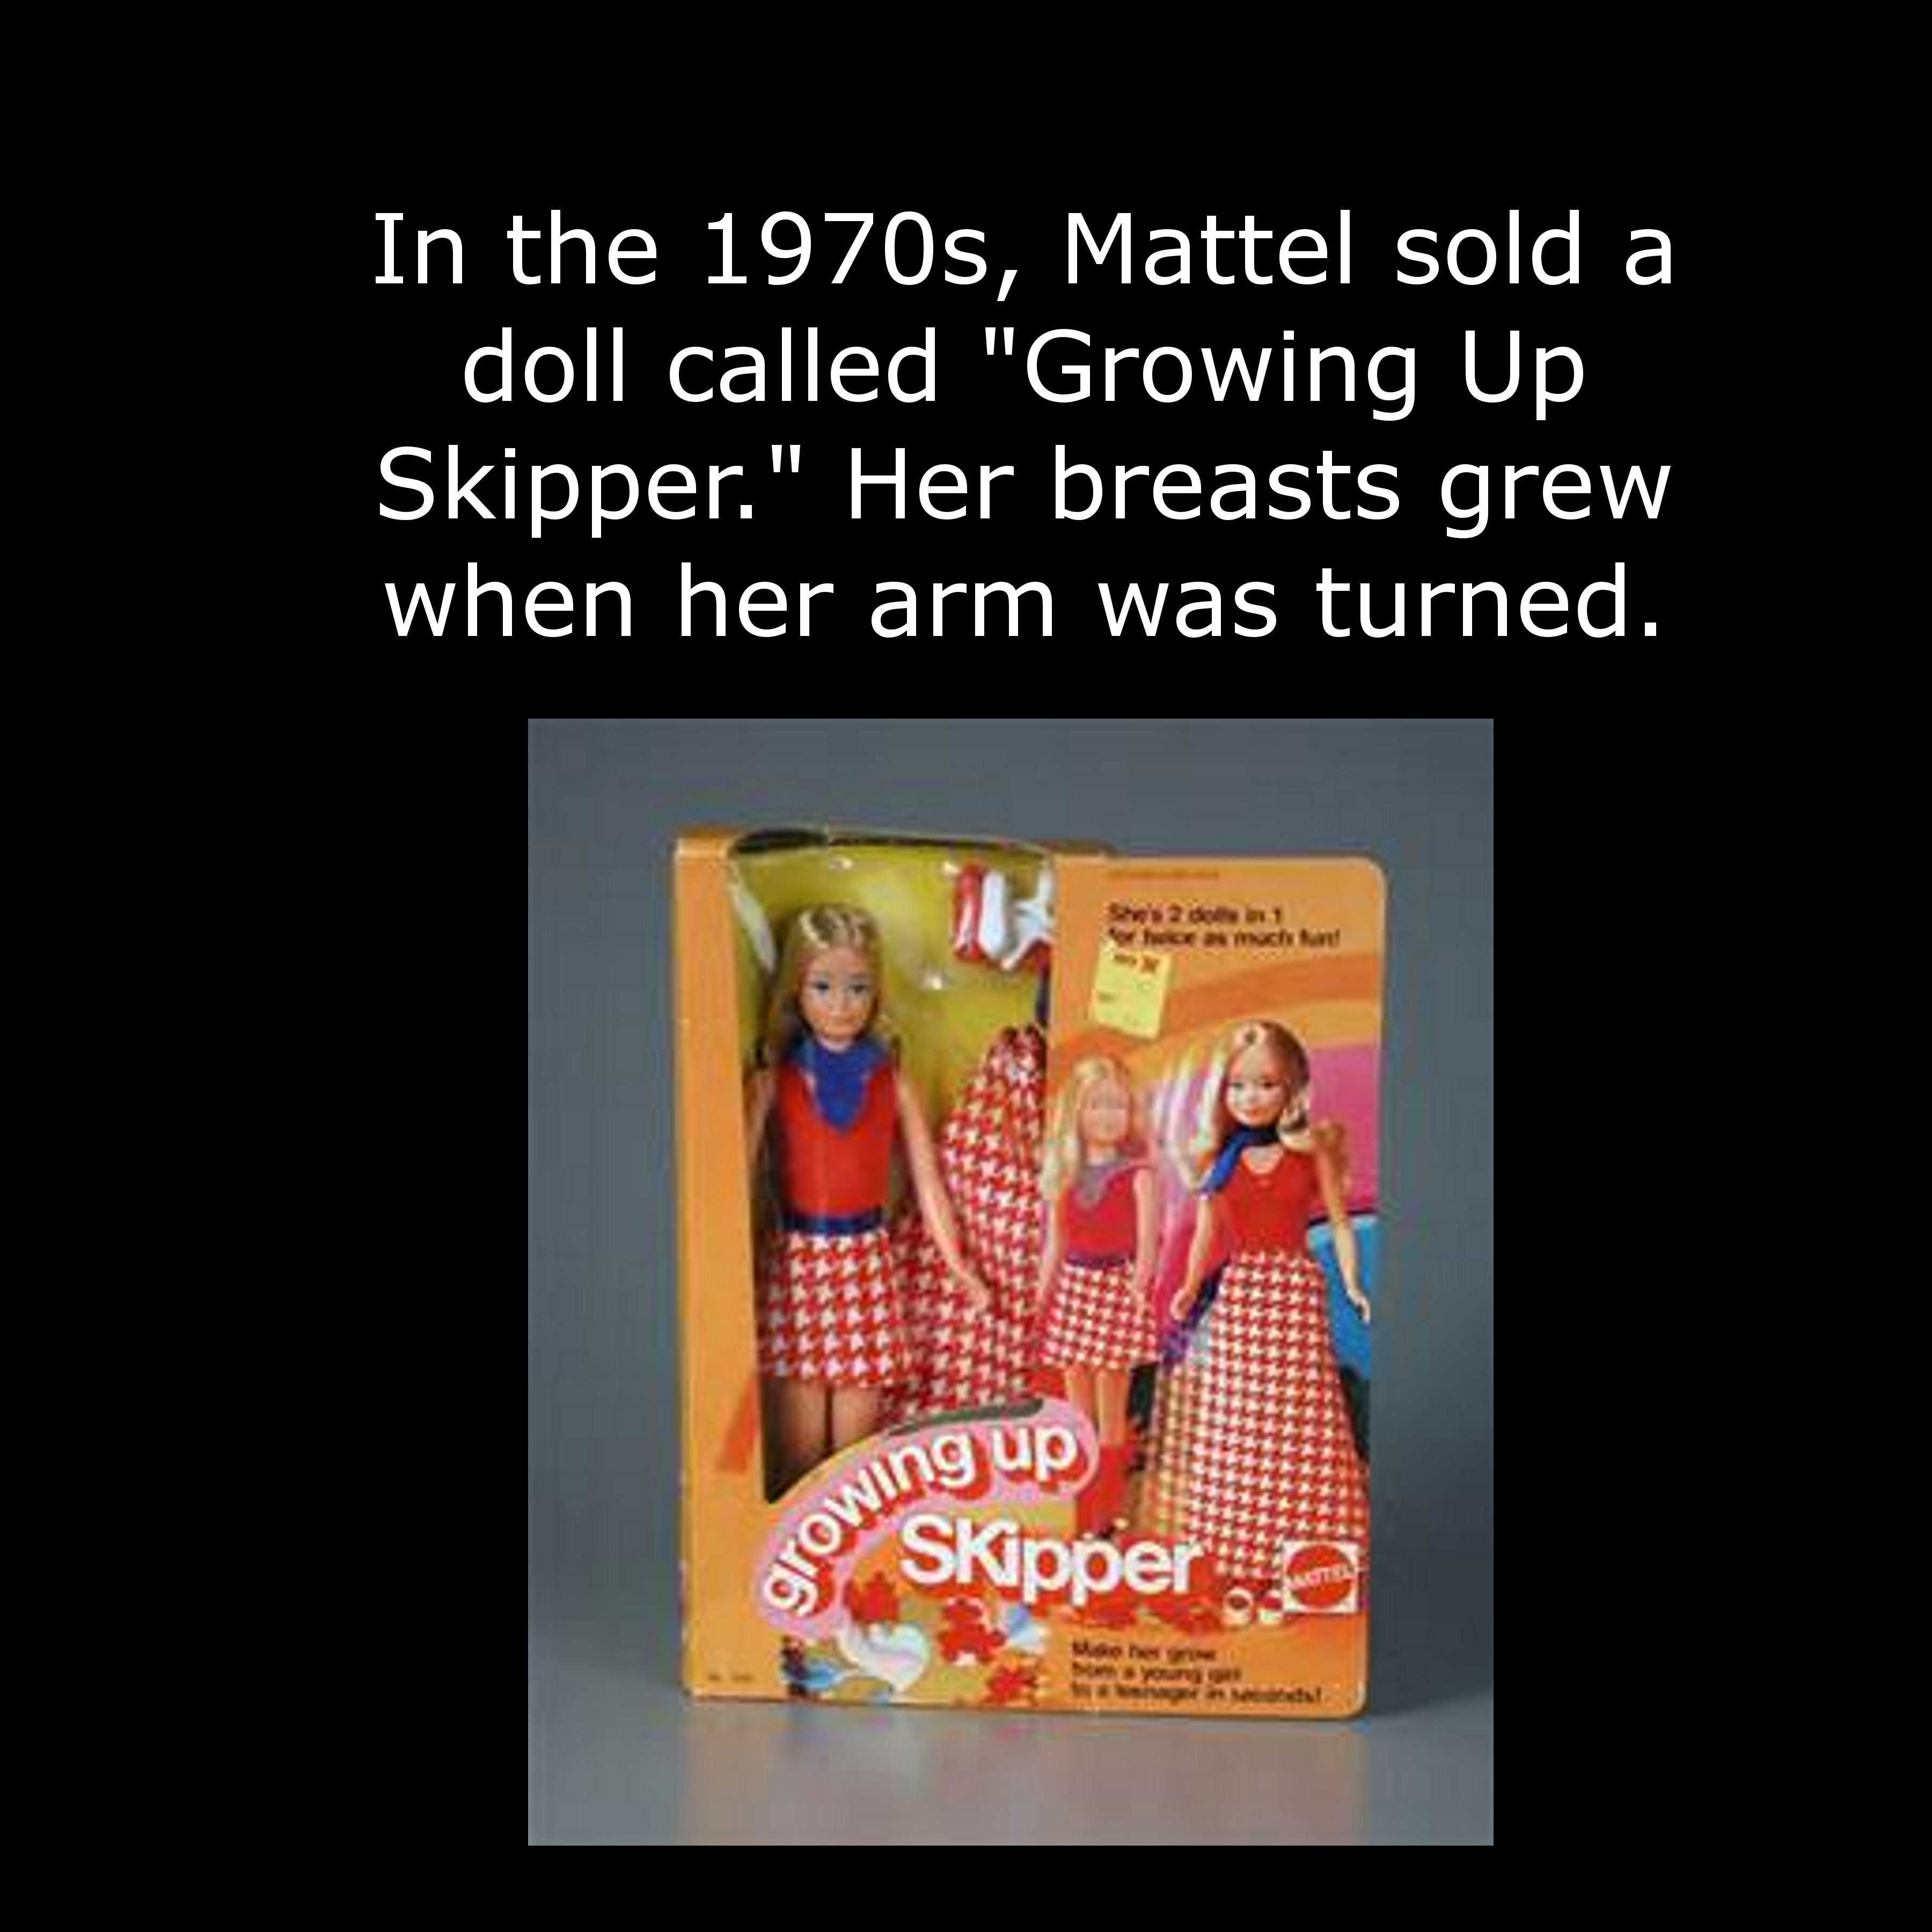 In the 1970s, Mattel sold a doll called "Growing Up Skipper." Her breasts grew when her arm was turned. wing up 2 Skipper a